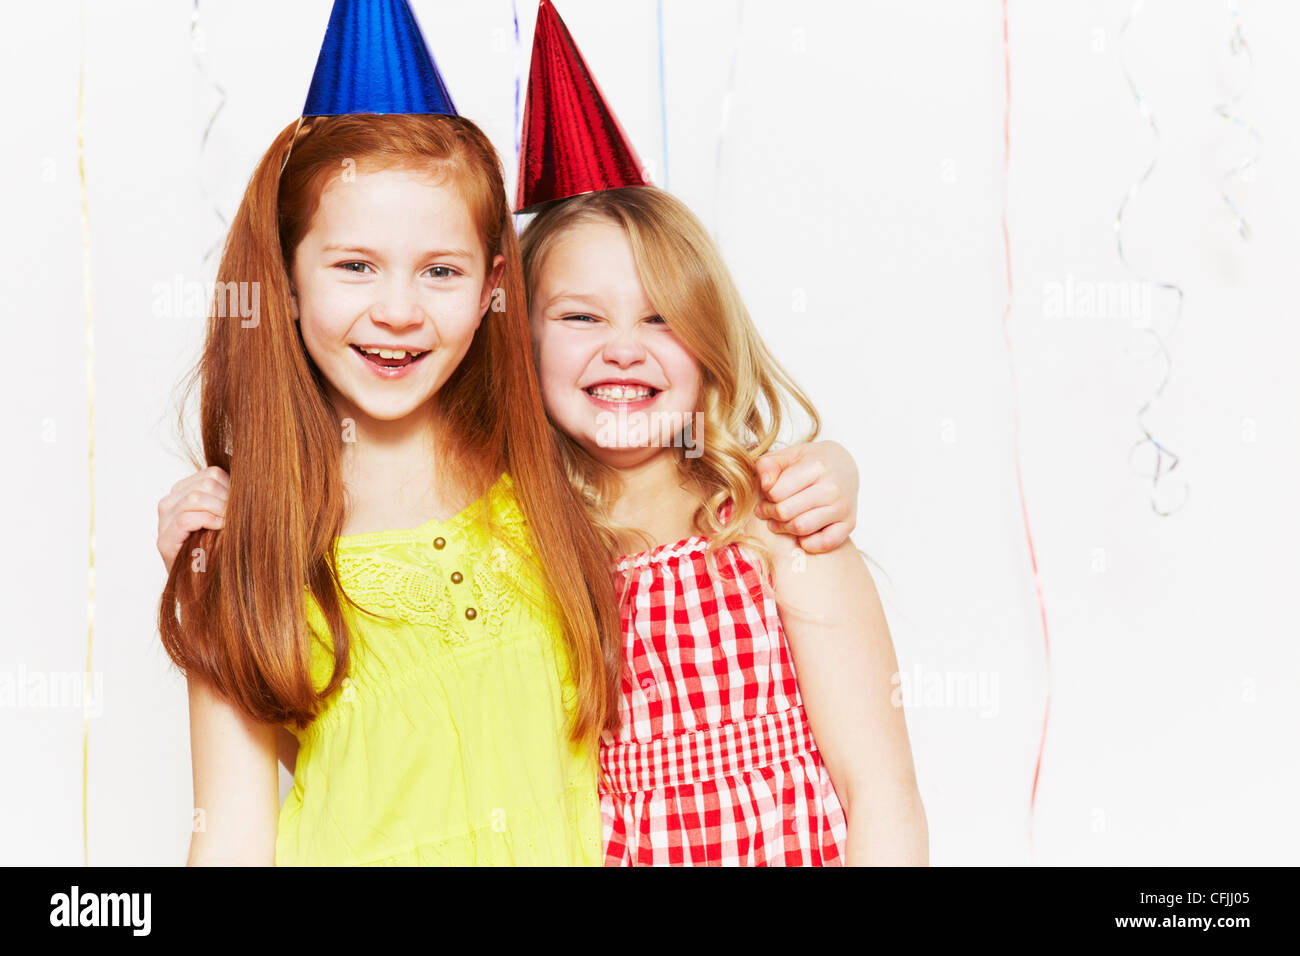 Happy girls in party hats Stock Photo - Alamy